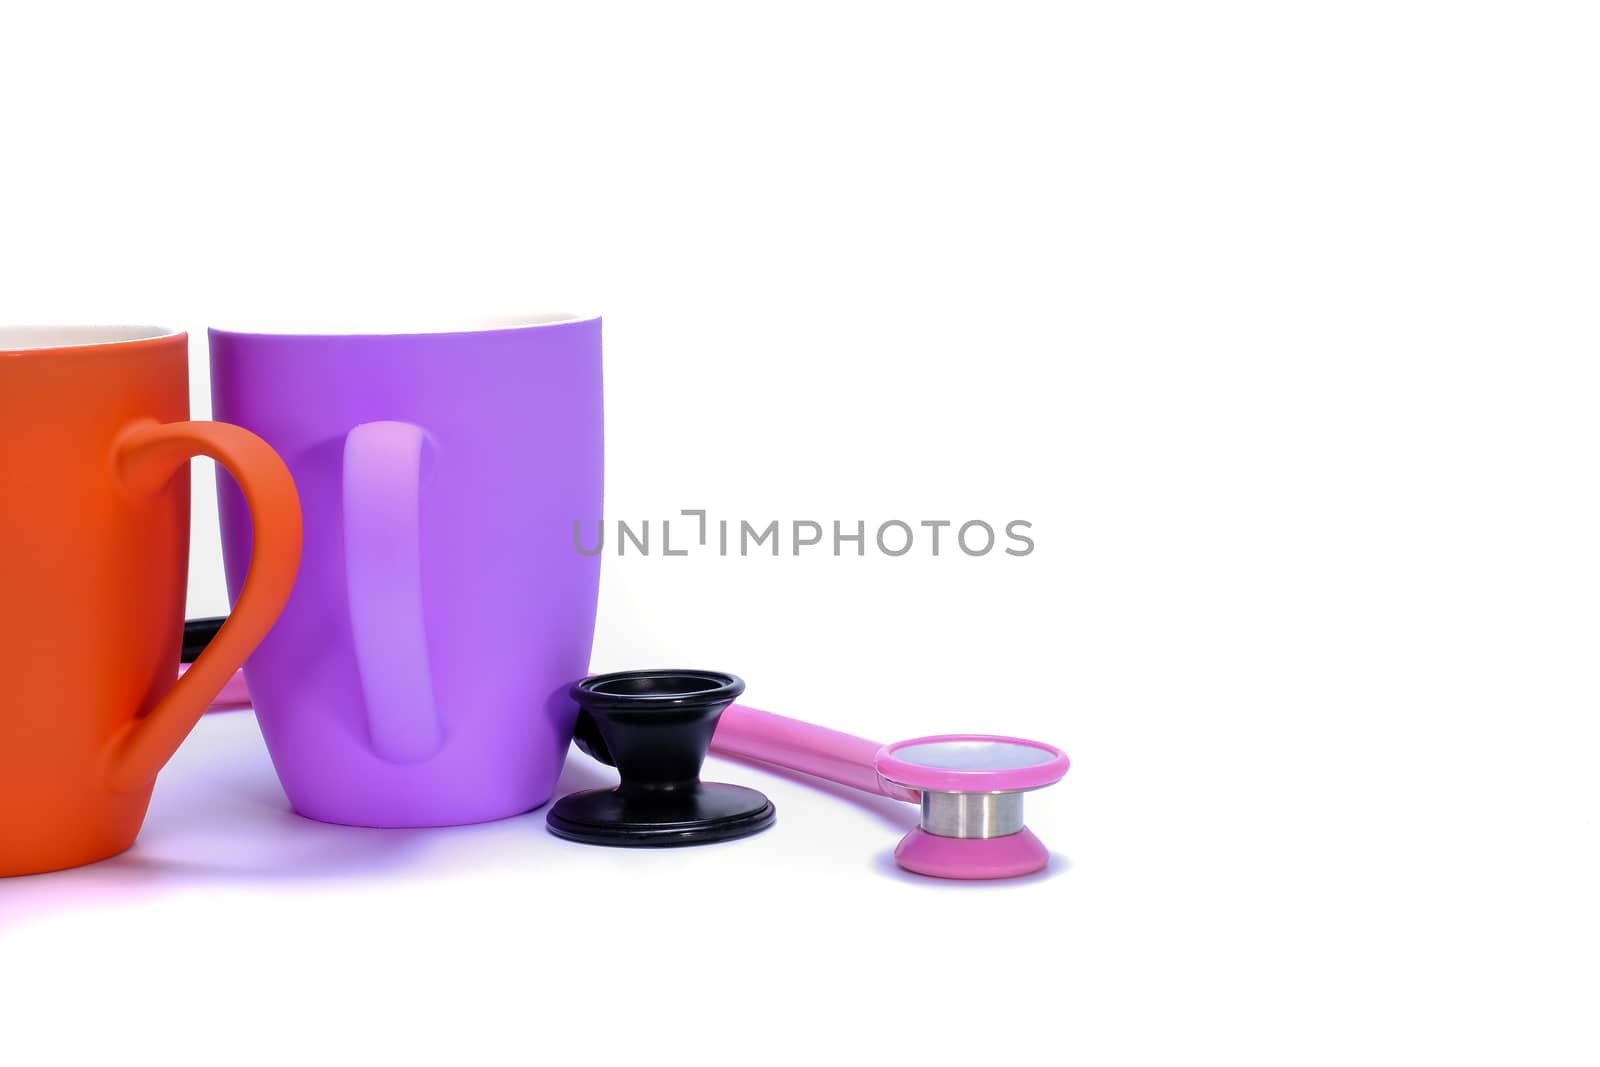 Two stetchoscopes and two ceramic coffee mugs isolated on white background, front view